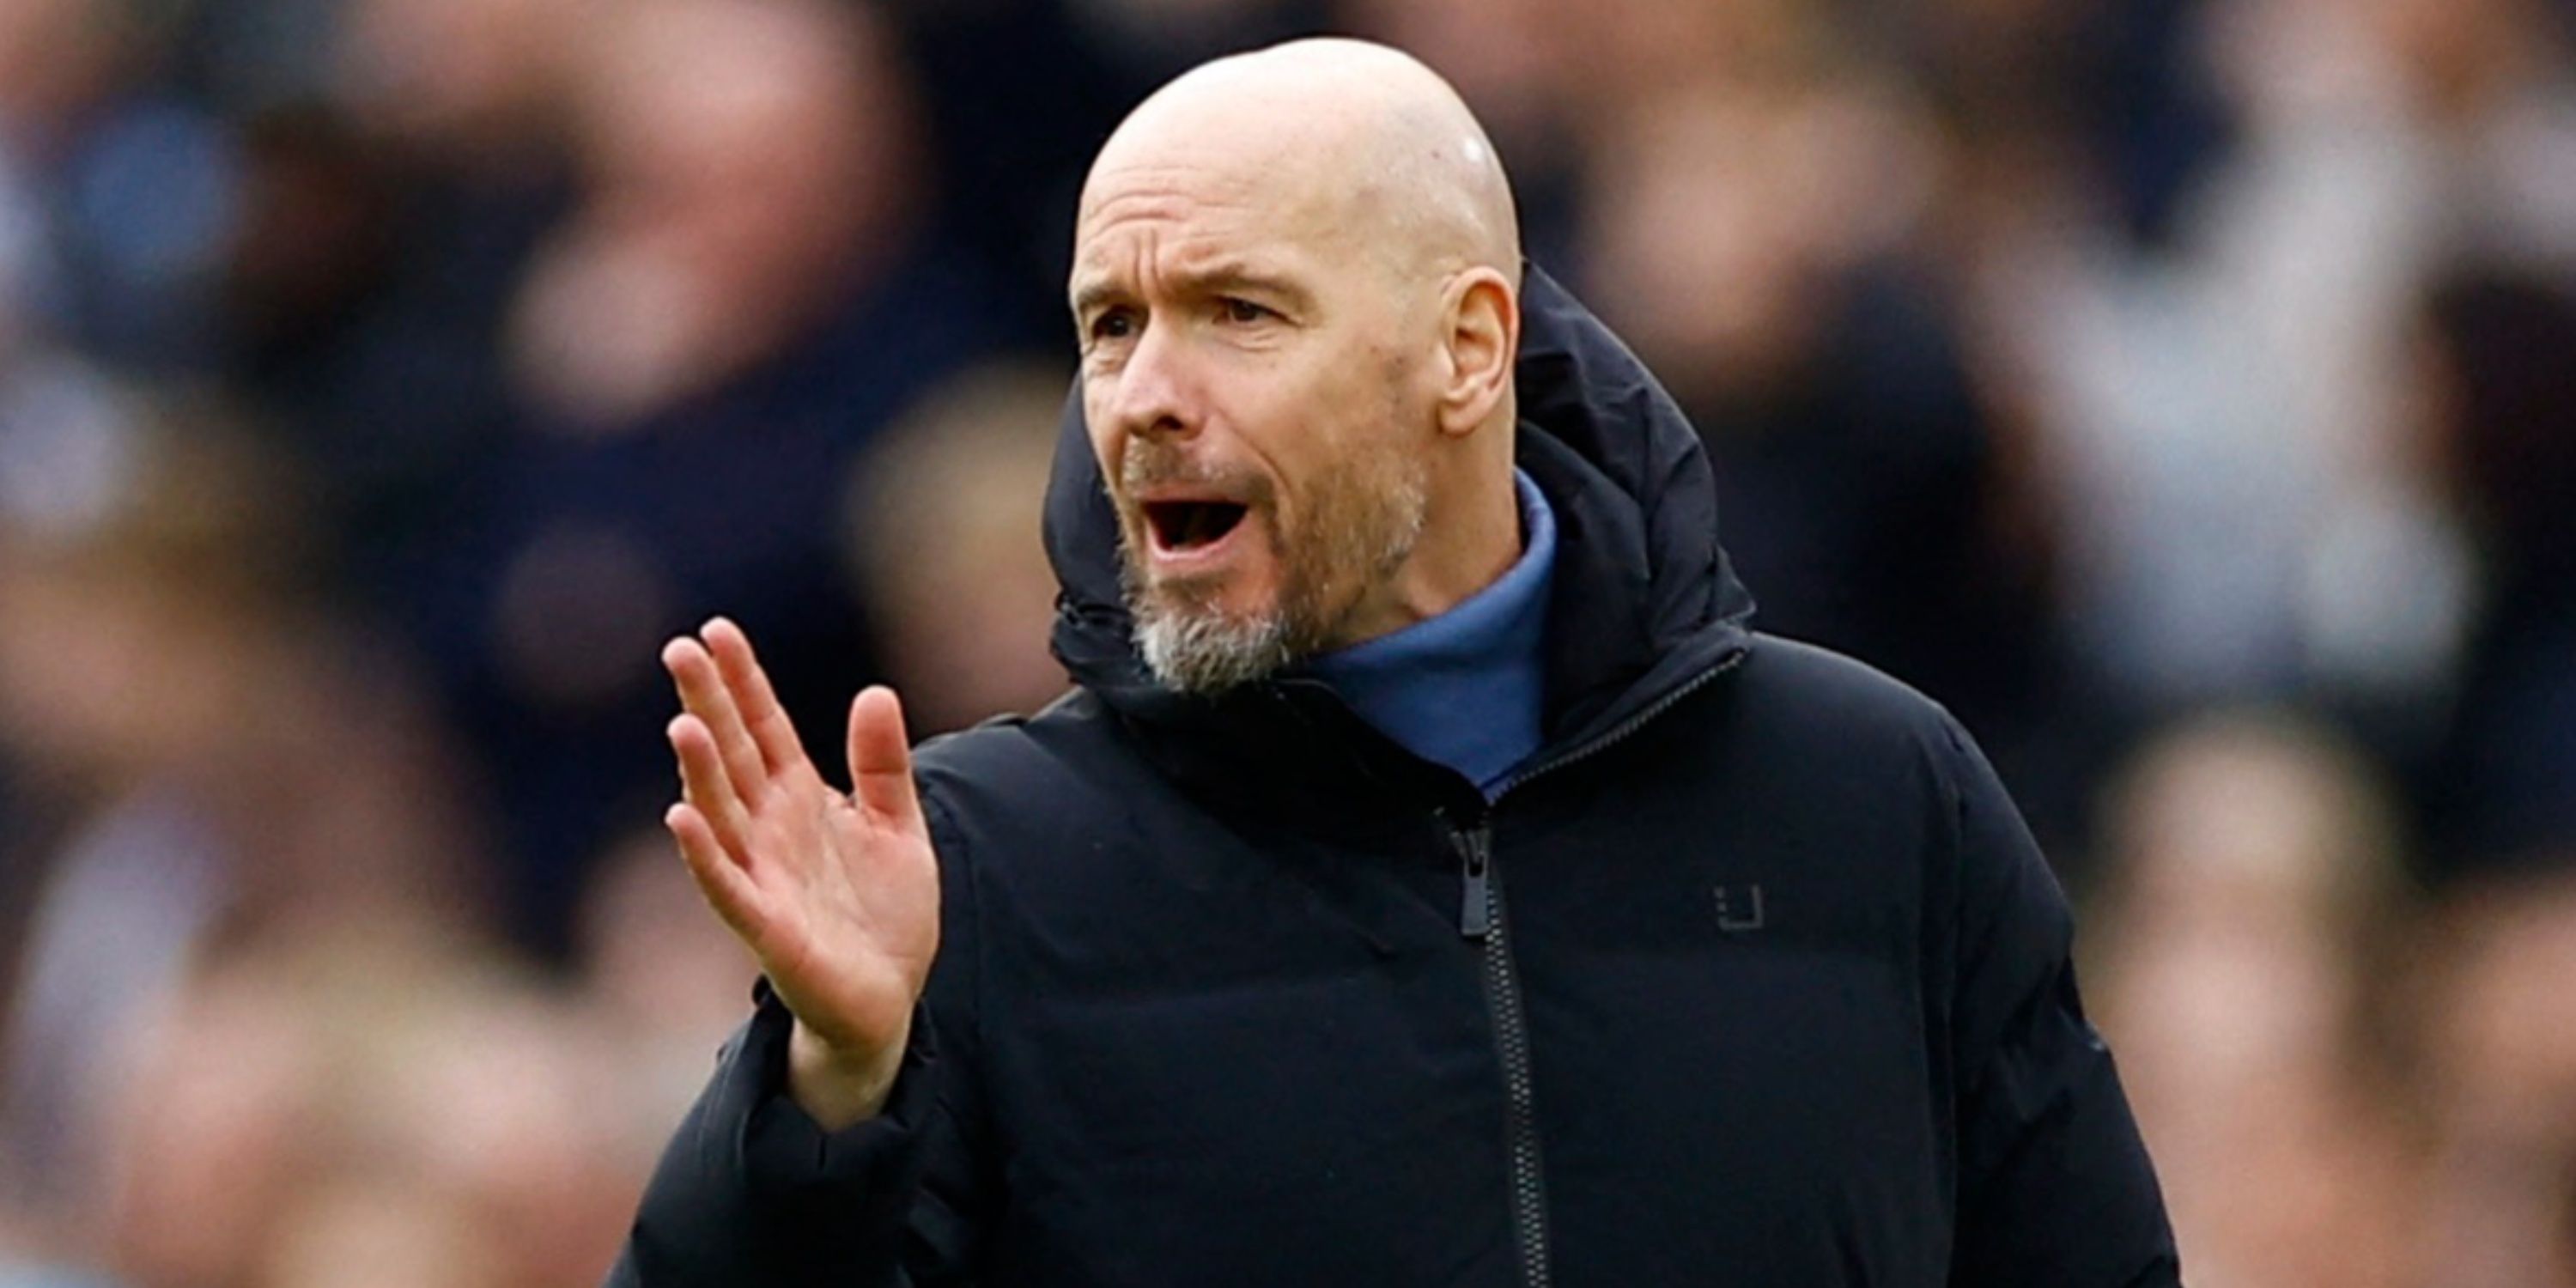 Manchester United boss Erik ten Hag shouting instructions from the touchline